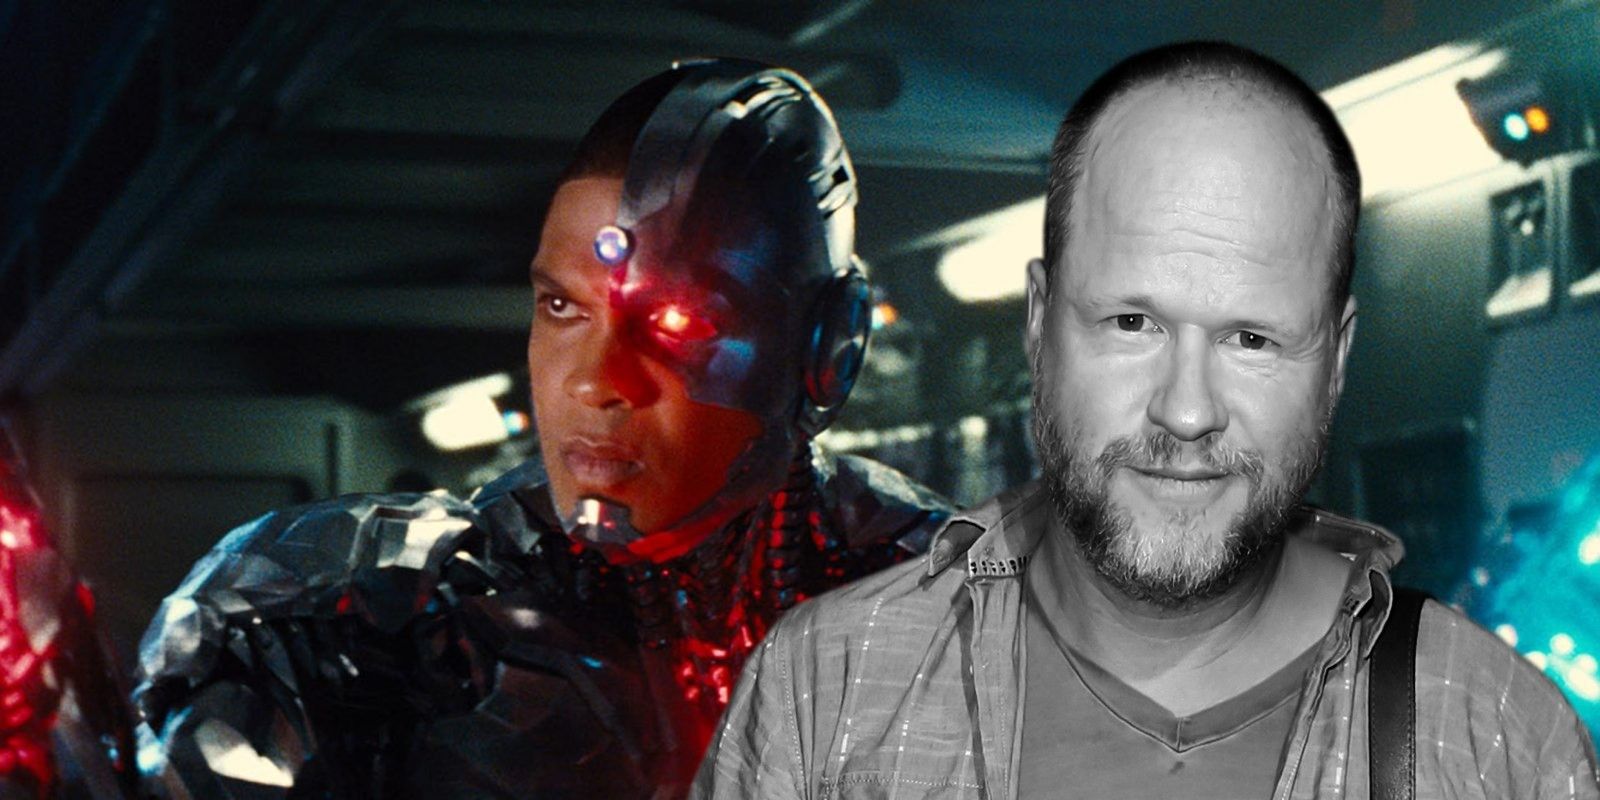 Ray Fisher as Cyborg in Justice League with Joss Whedon.